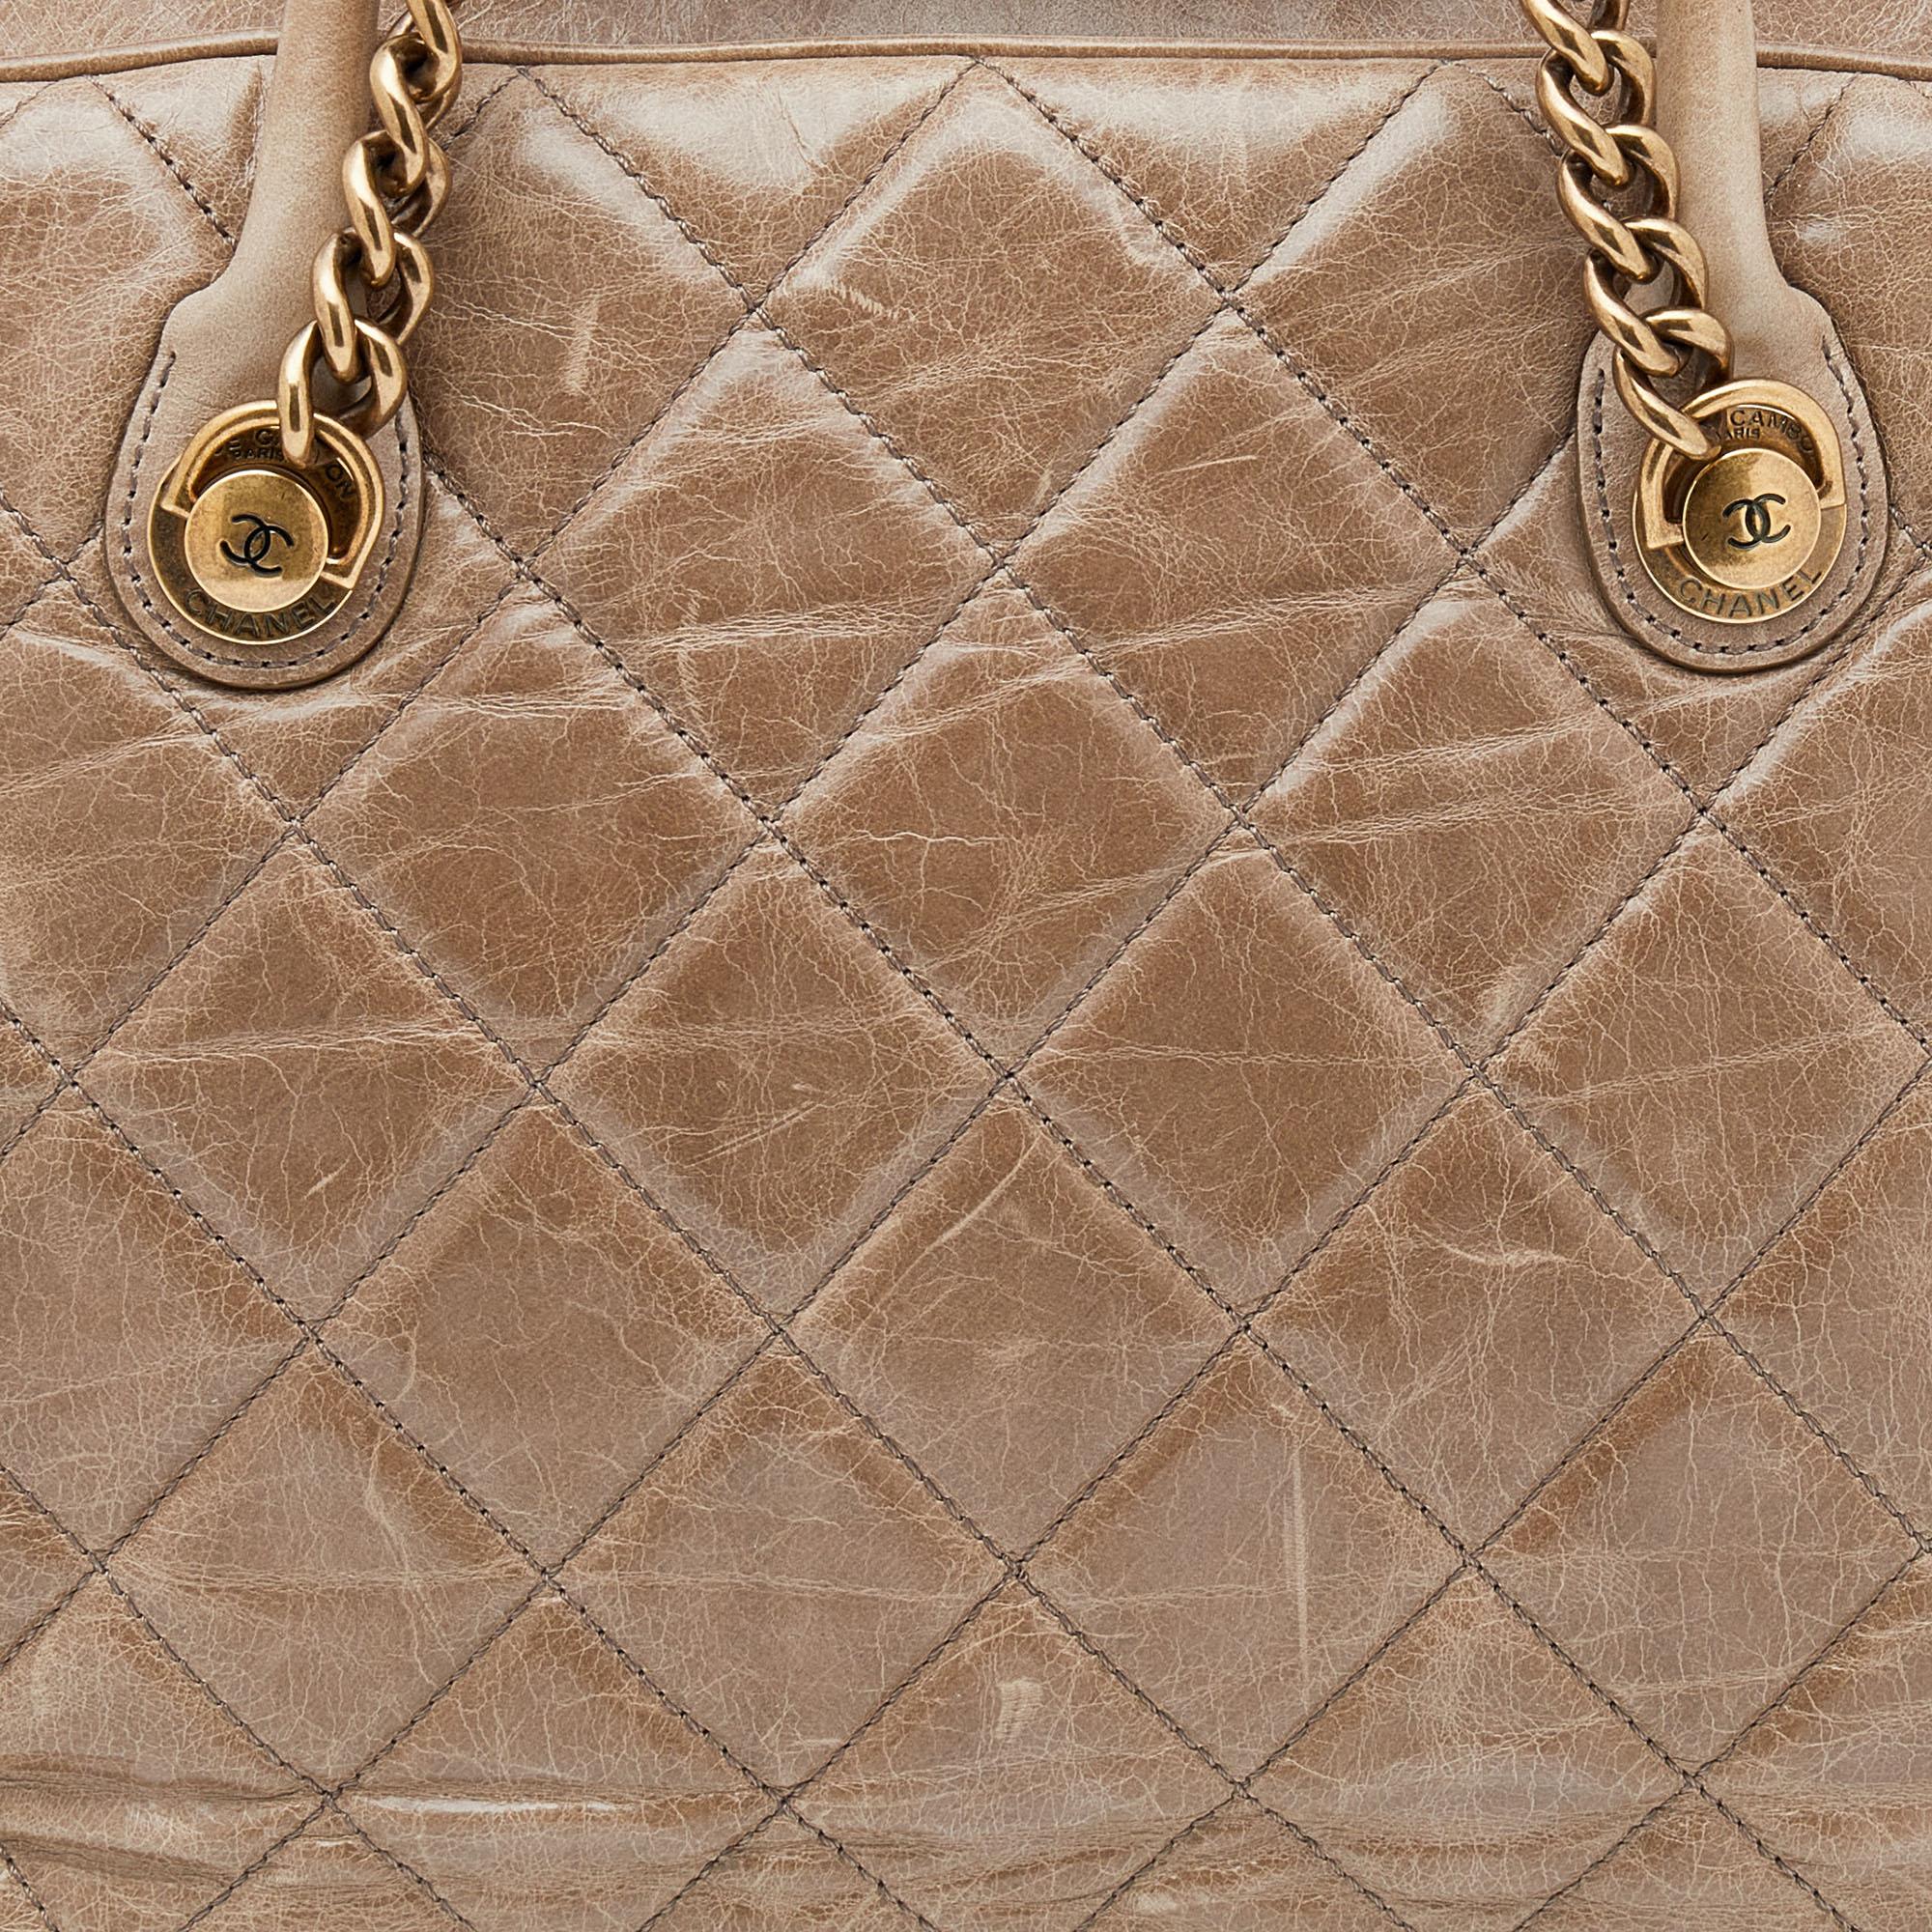 Chanel Dark Beige Quilted Leather Castle Rock Bowling Bag 2